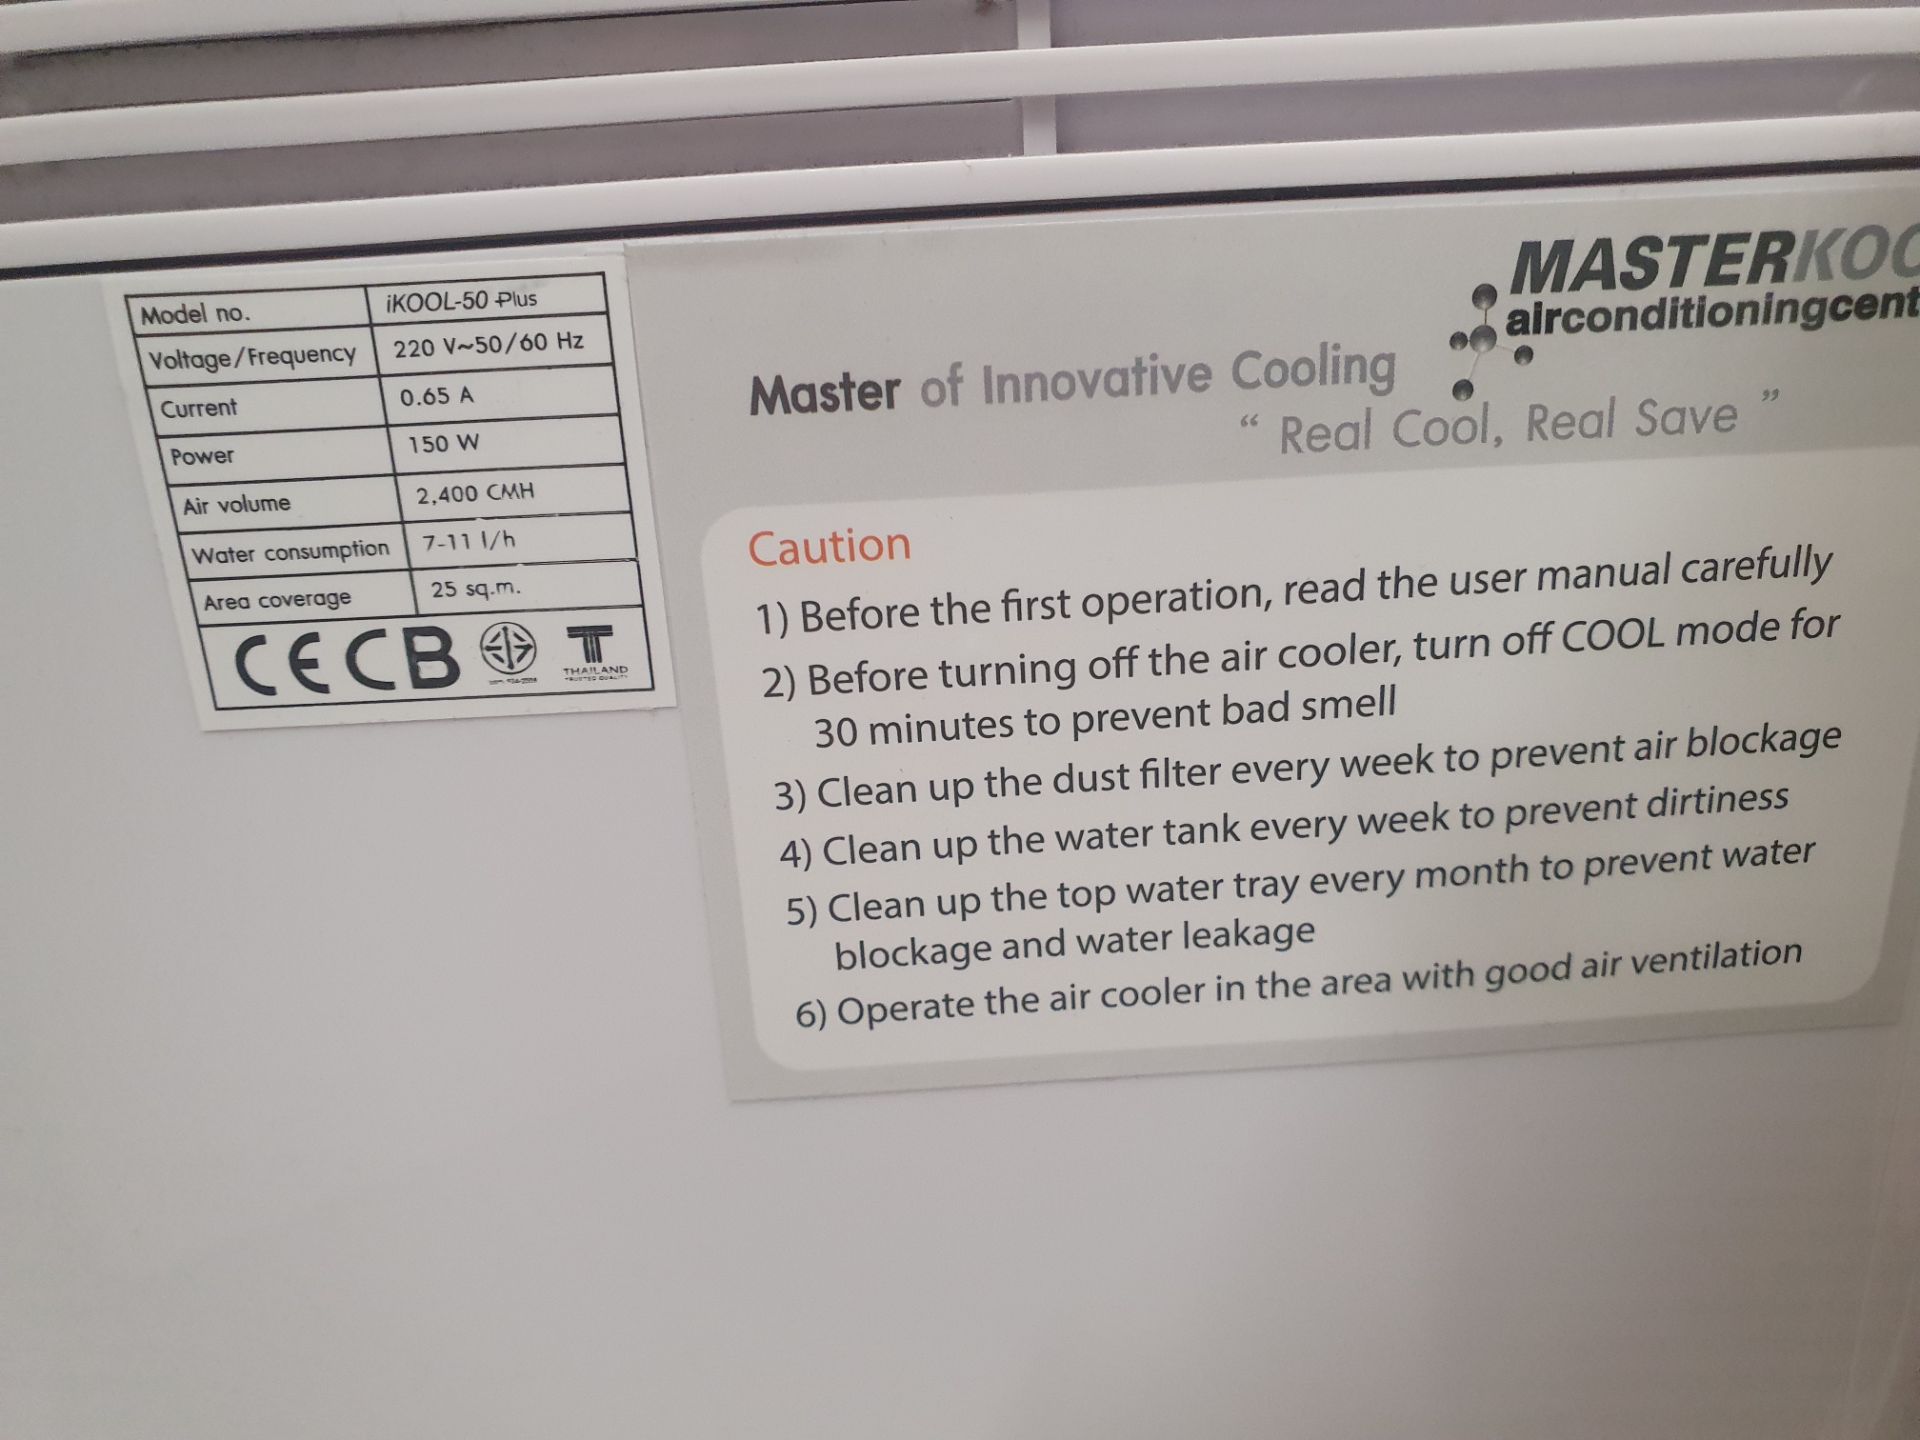 * Masterkool ikool-50plus air conditioning centre - evoporative cooler - Image 3 of 3